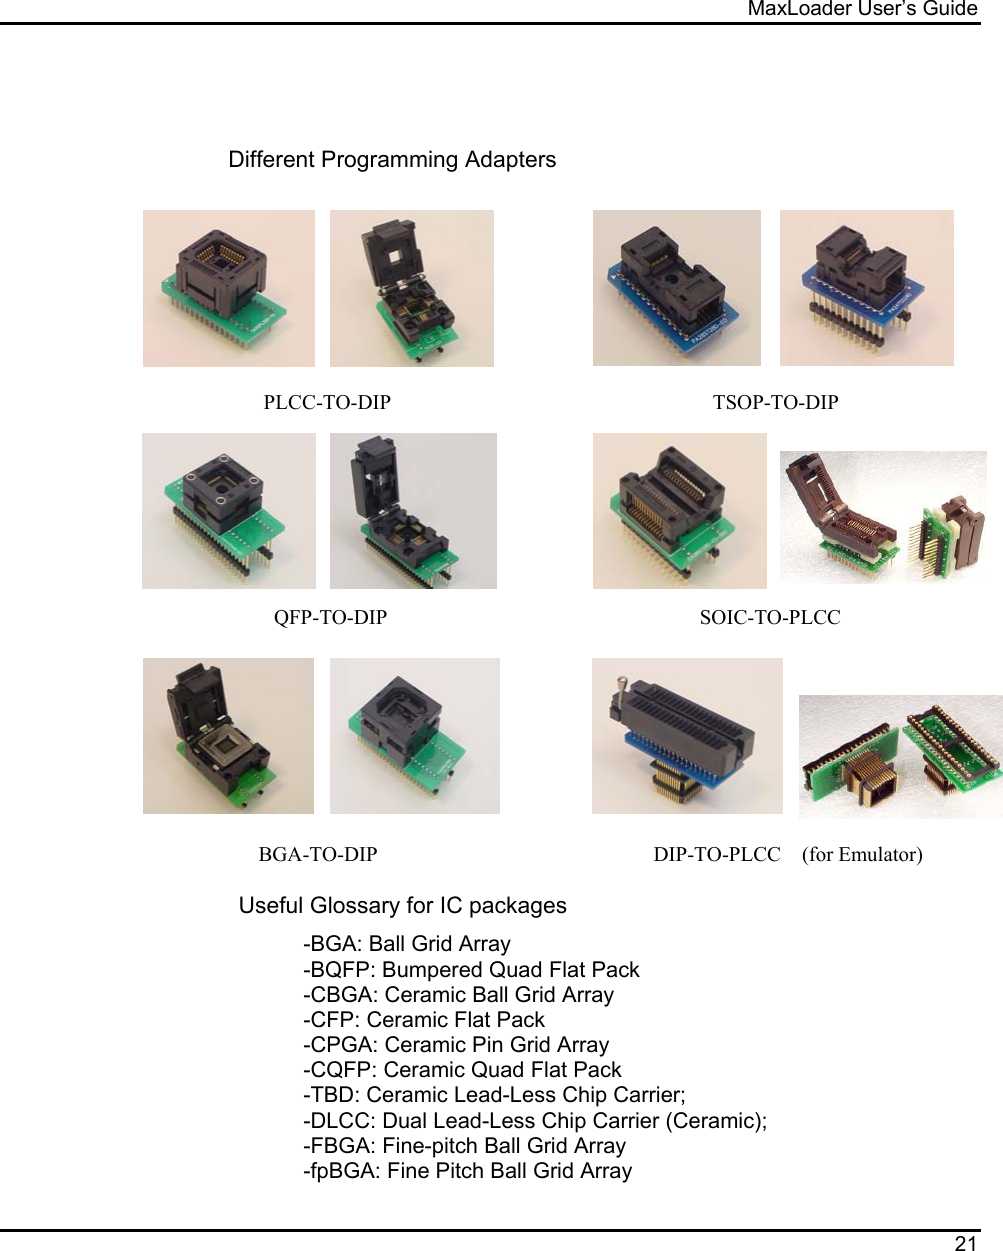 MaxLoader User’s Guide  21     Different Programming Adapters                                                                             PLCC-TO-DIP                           TSOP-TO-DIP                                                             QFP-T                                                         QFP-TO-DIP                                                            SOIC-TO-PLCC                 BGA-TO-DIP                                                     DIP-TO-PLCC    (for Emulator)  Useful Glossary for IC packages -BGA: Ball Grid Array -BQFP: Bumpered Quad Flat Pack -CBGA: Ceramic Ball Grid Array -CFP: Ceramic Flat Pack -CPGA: Ceramic Pin Grid Array  -CQFP: Ceramic Quad Flat Pack -TBD: Ceramic Lead-Less Chip Carrier; -DLCC: Dual Lead-Less Chip Carrier (Ceramic); -FBGA: Fine-pitch Ball Grid Array -fpBGA: Fine Pitch Ball Grid Array 